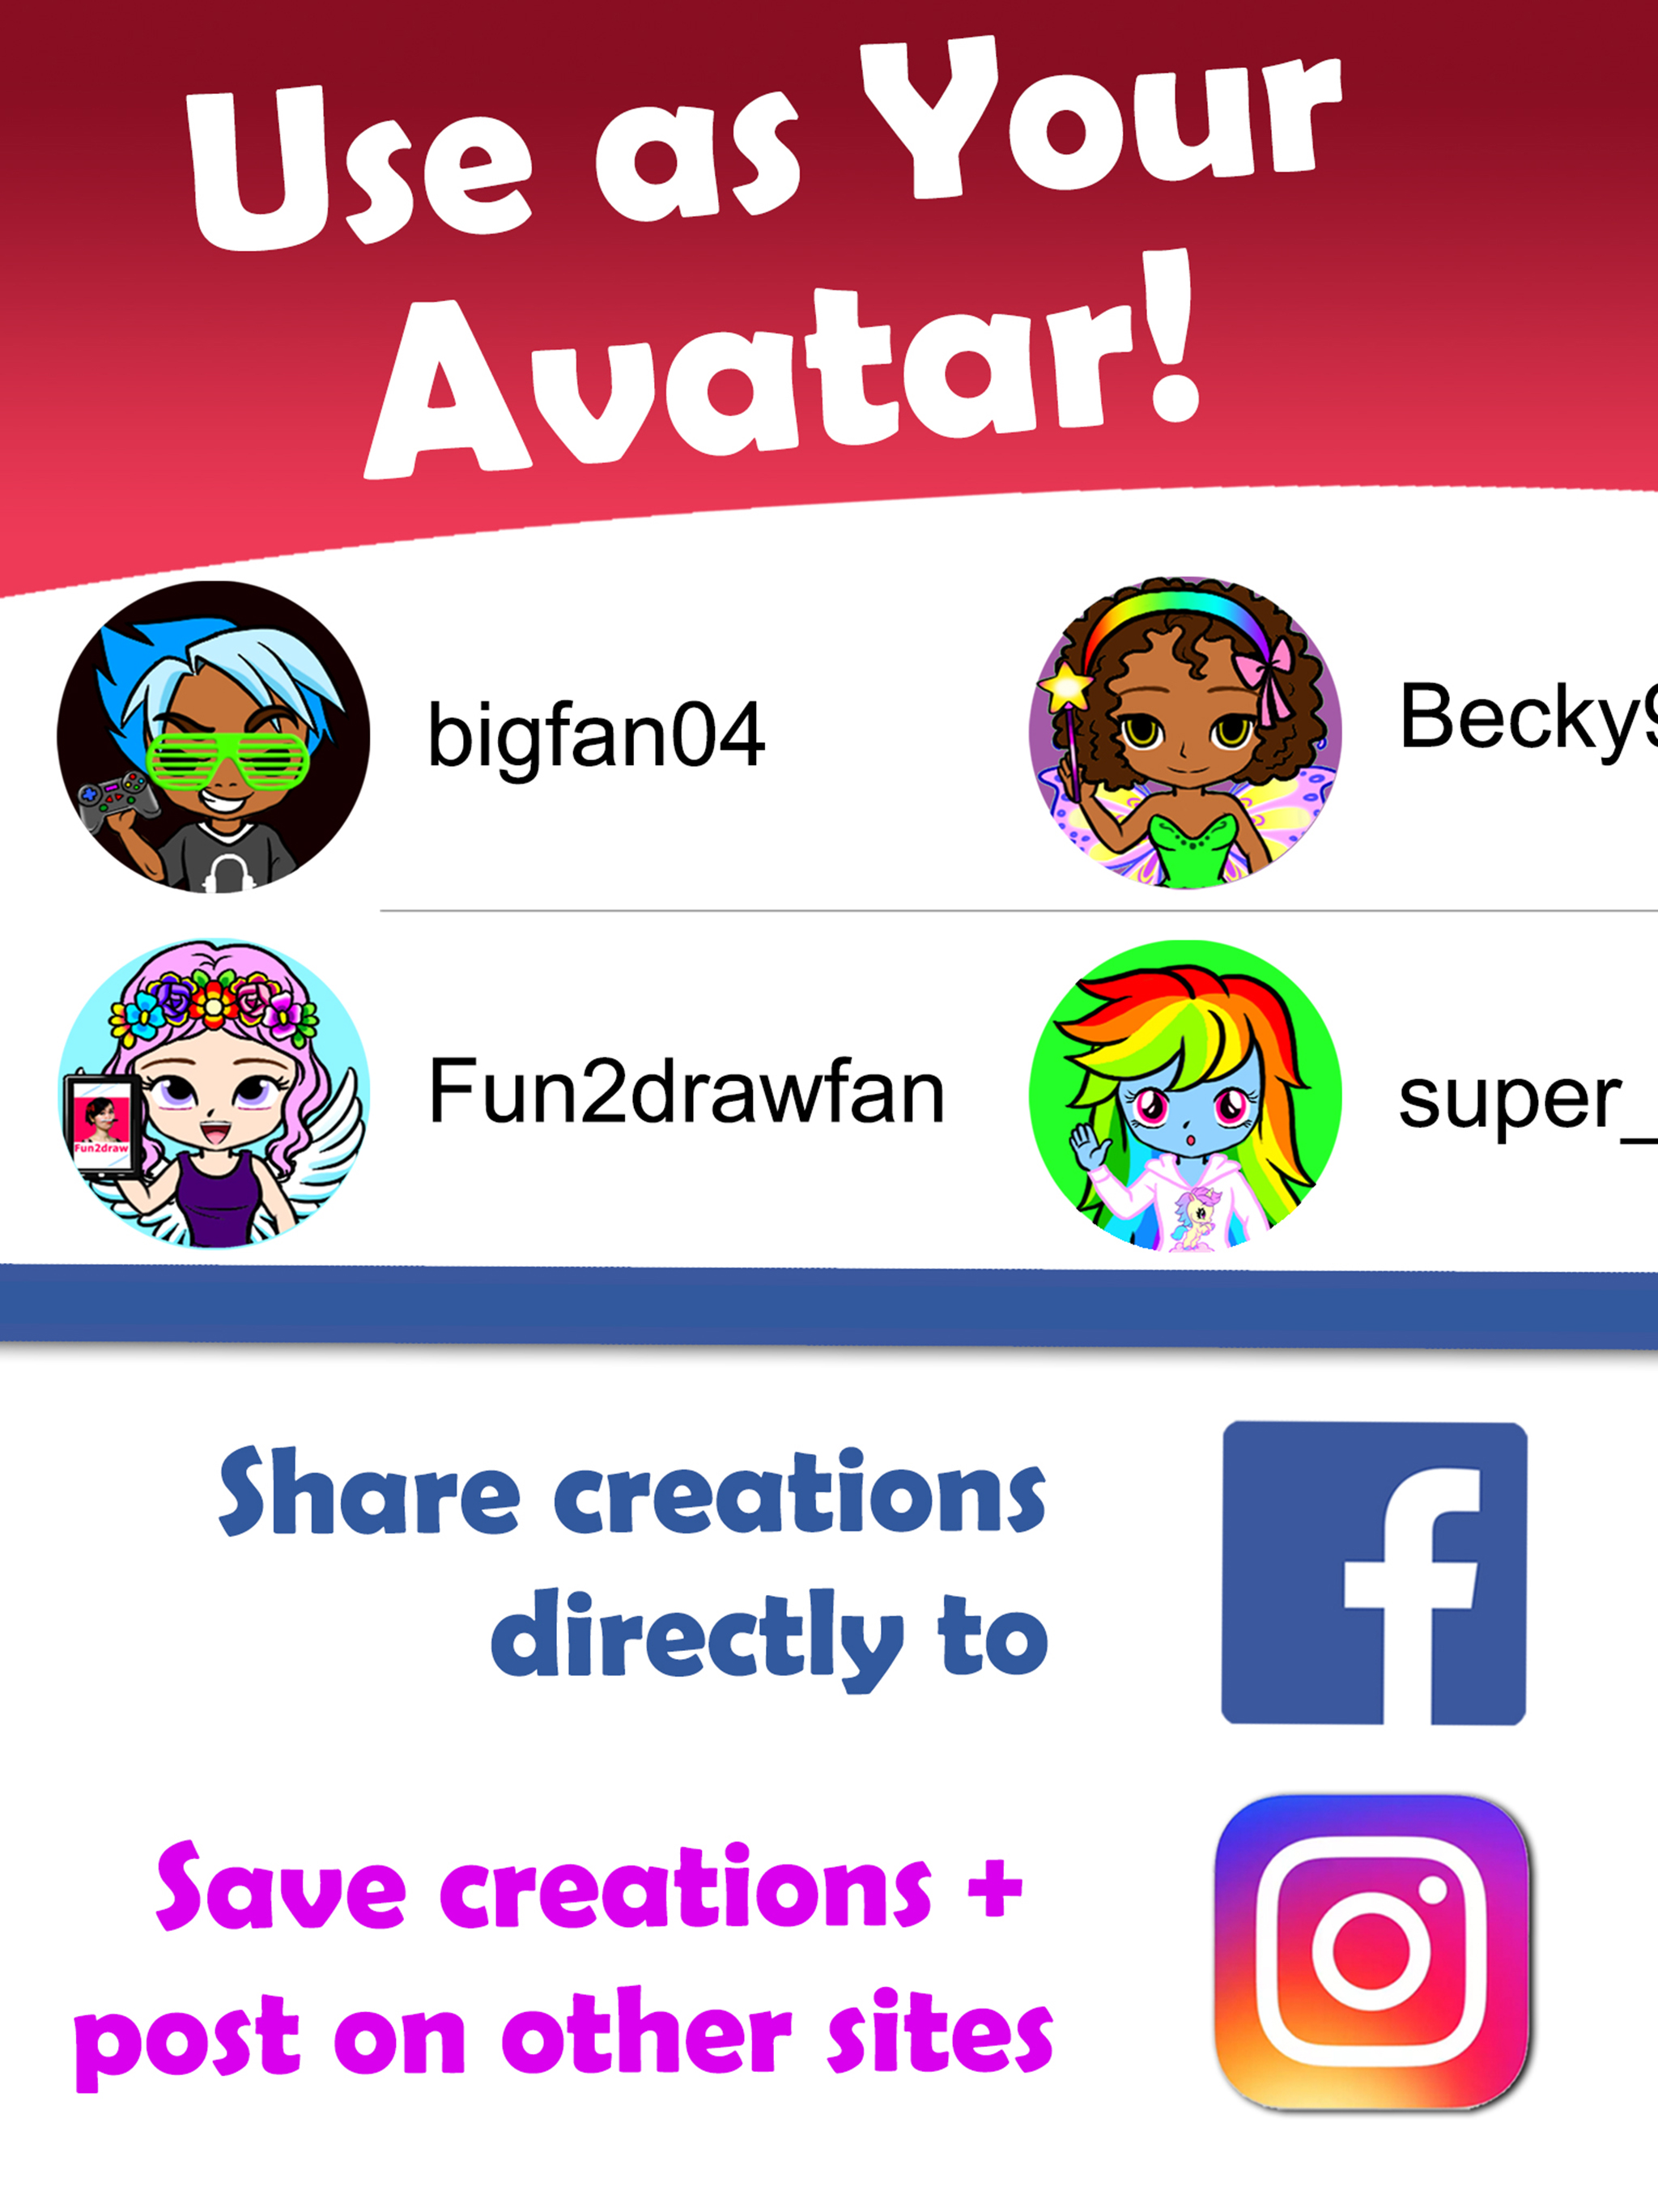 Share to your favorite social media sites, or use as your avatars!